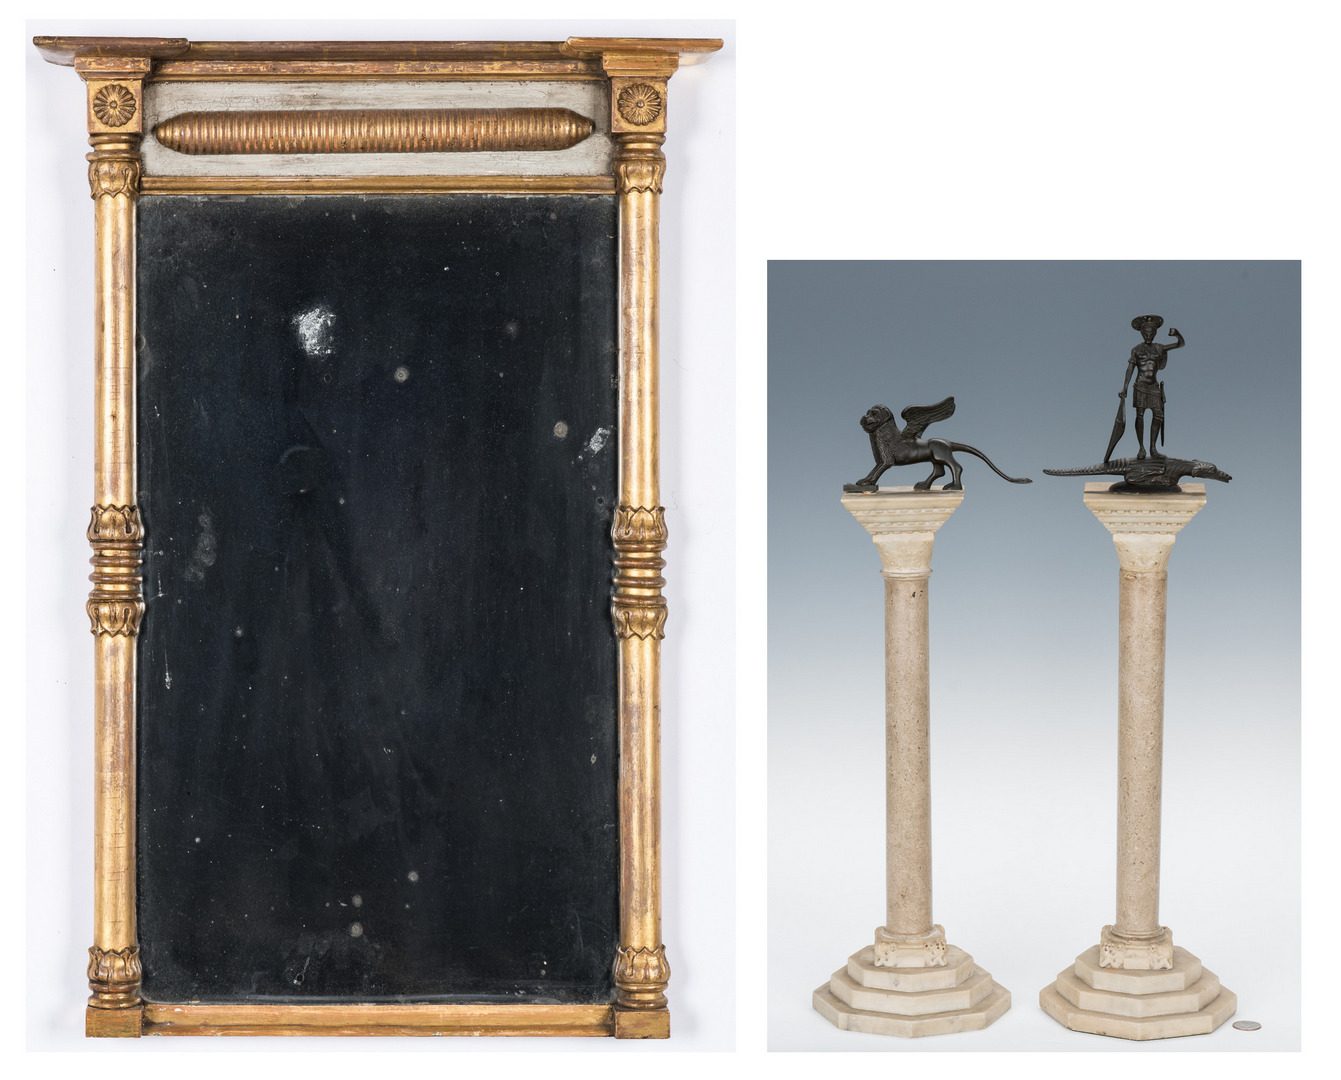 Lot 622: Regency Mirror and 2 Columns with Figures